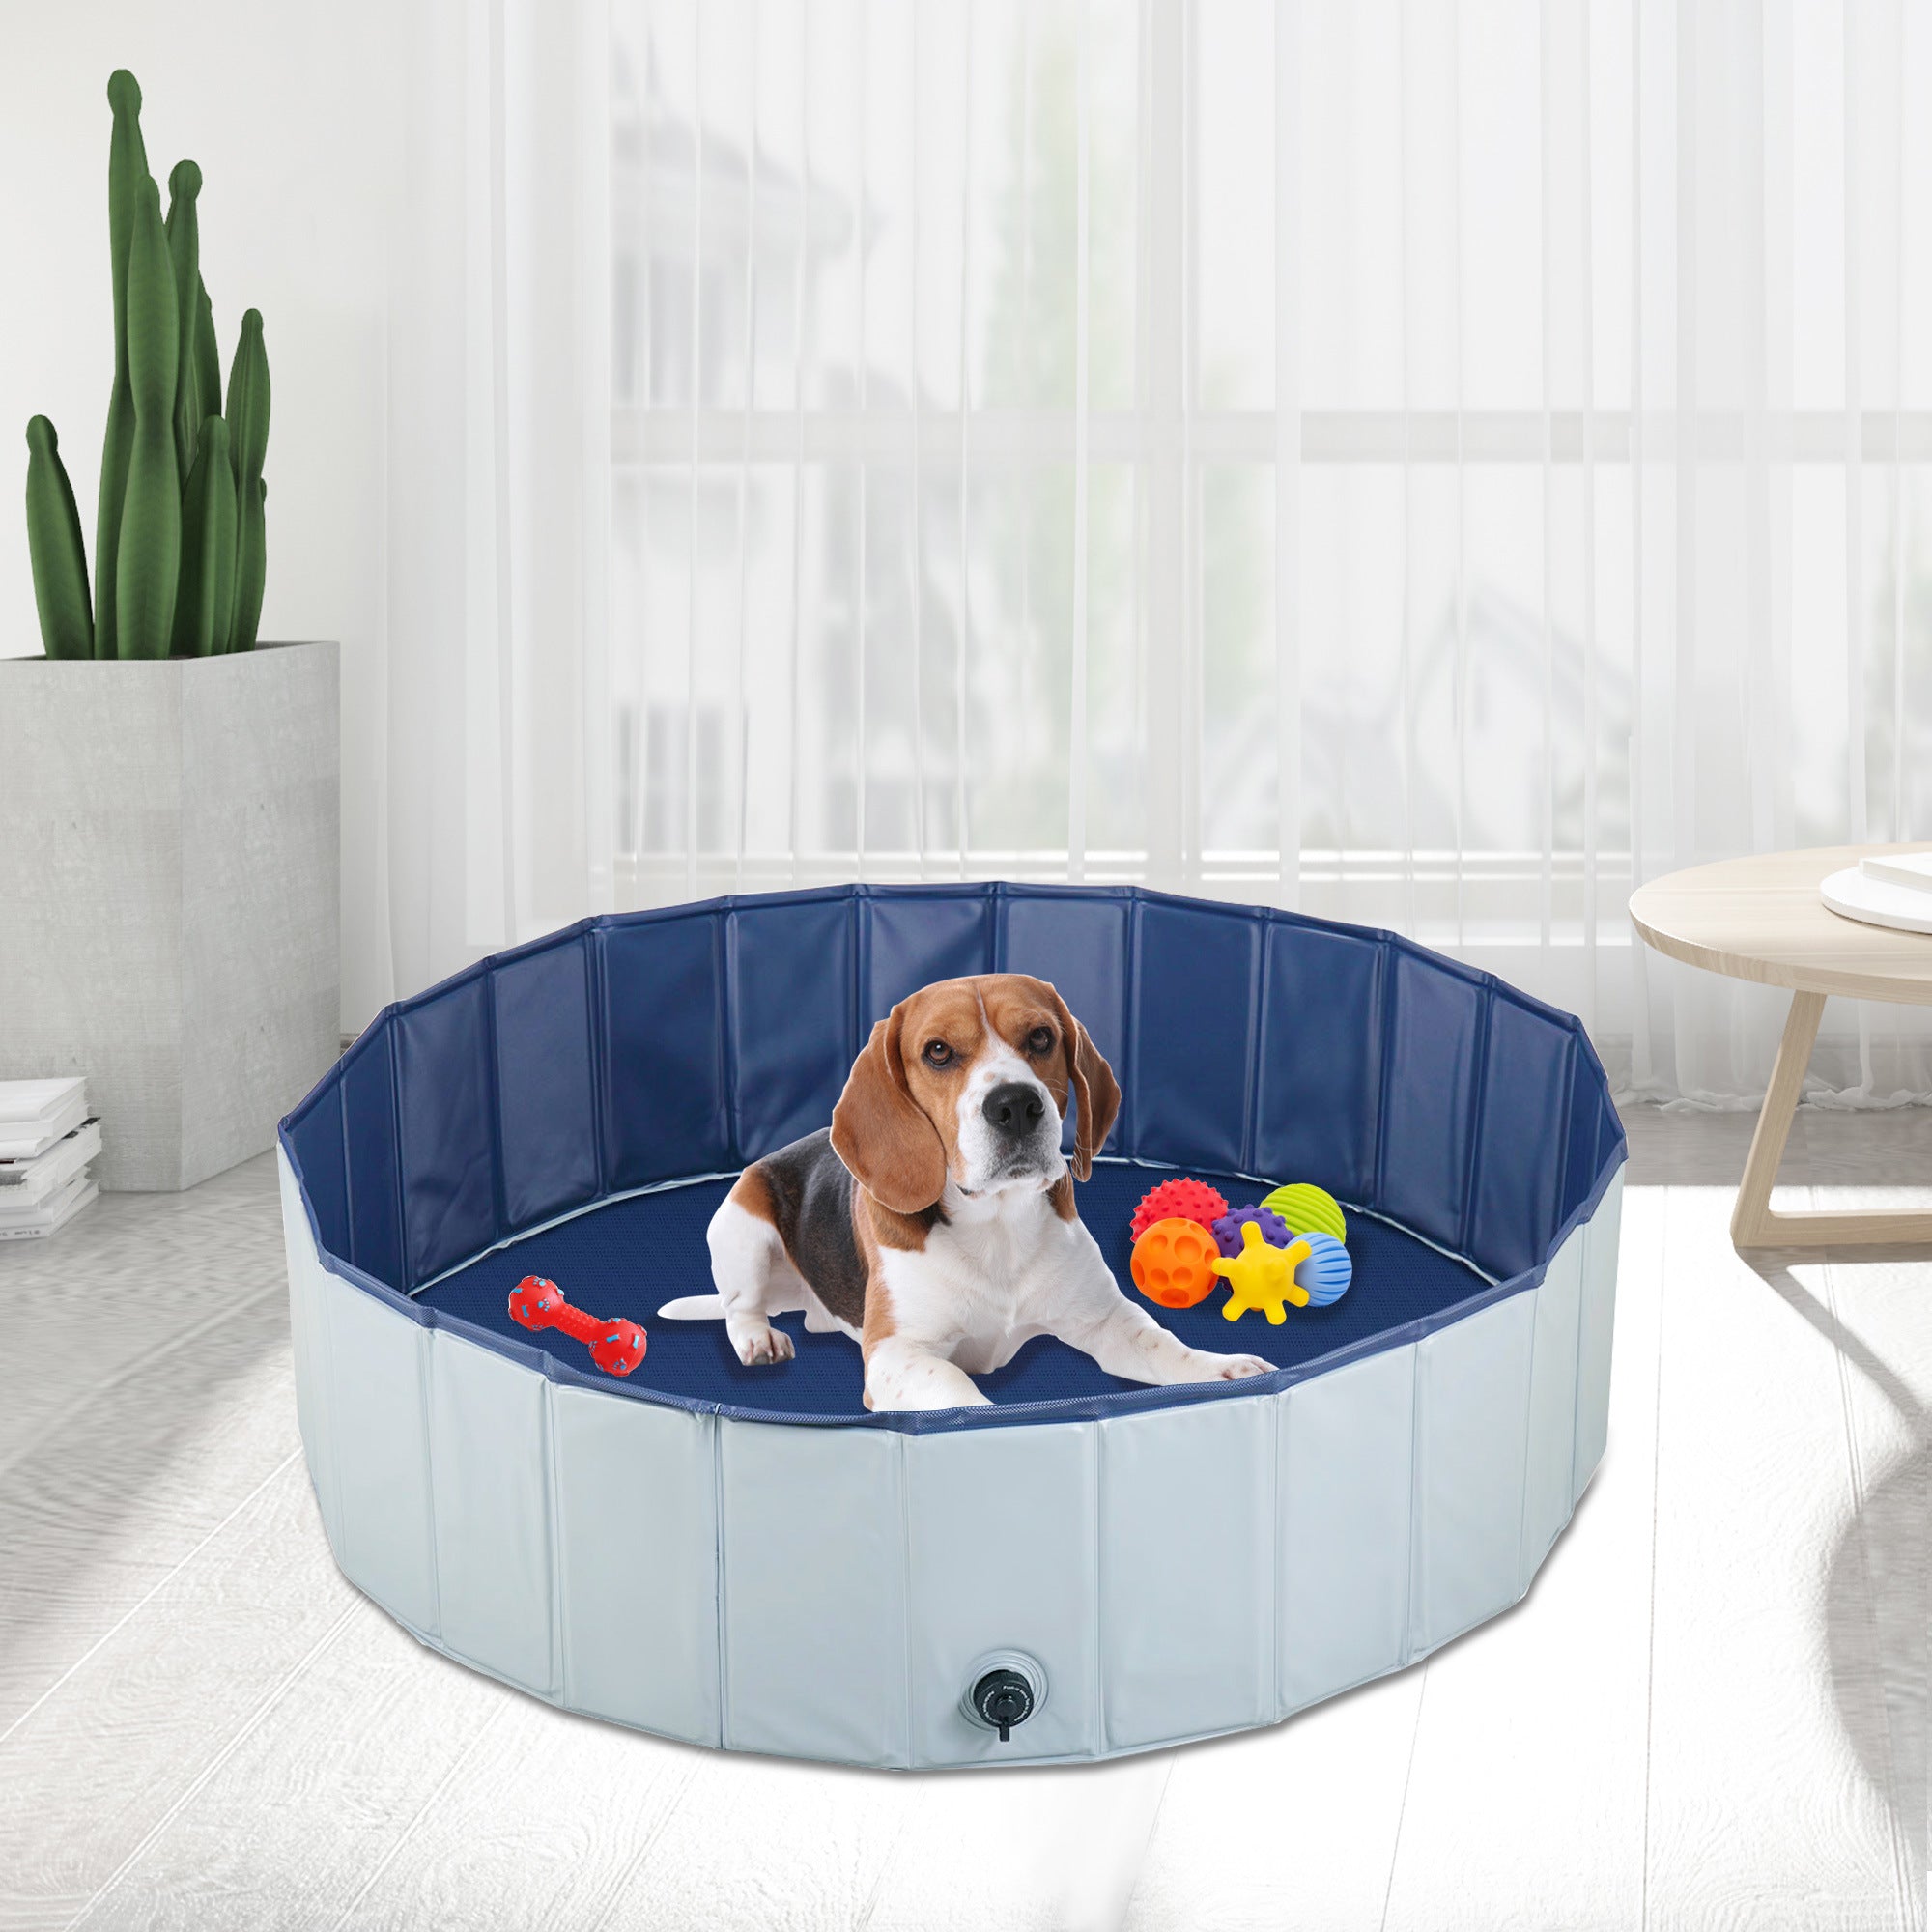 Foldable Pet Bath Pool, Collapsible Dog Bathing Tub, Kiddie and Toy Pool for Dogs Cats and Kids